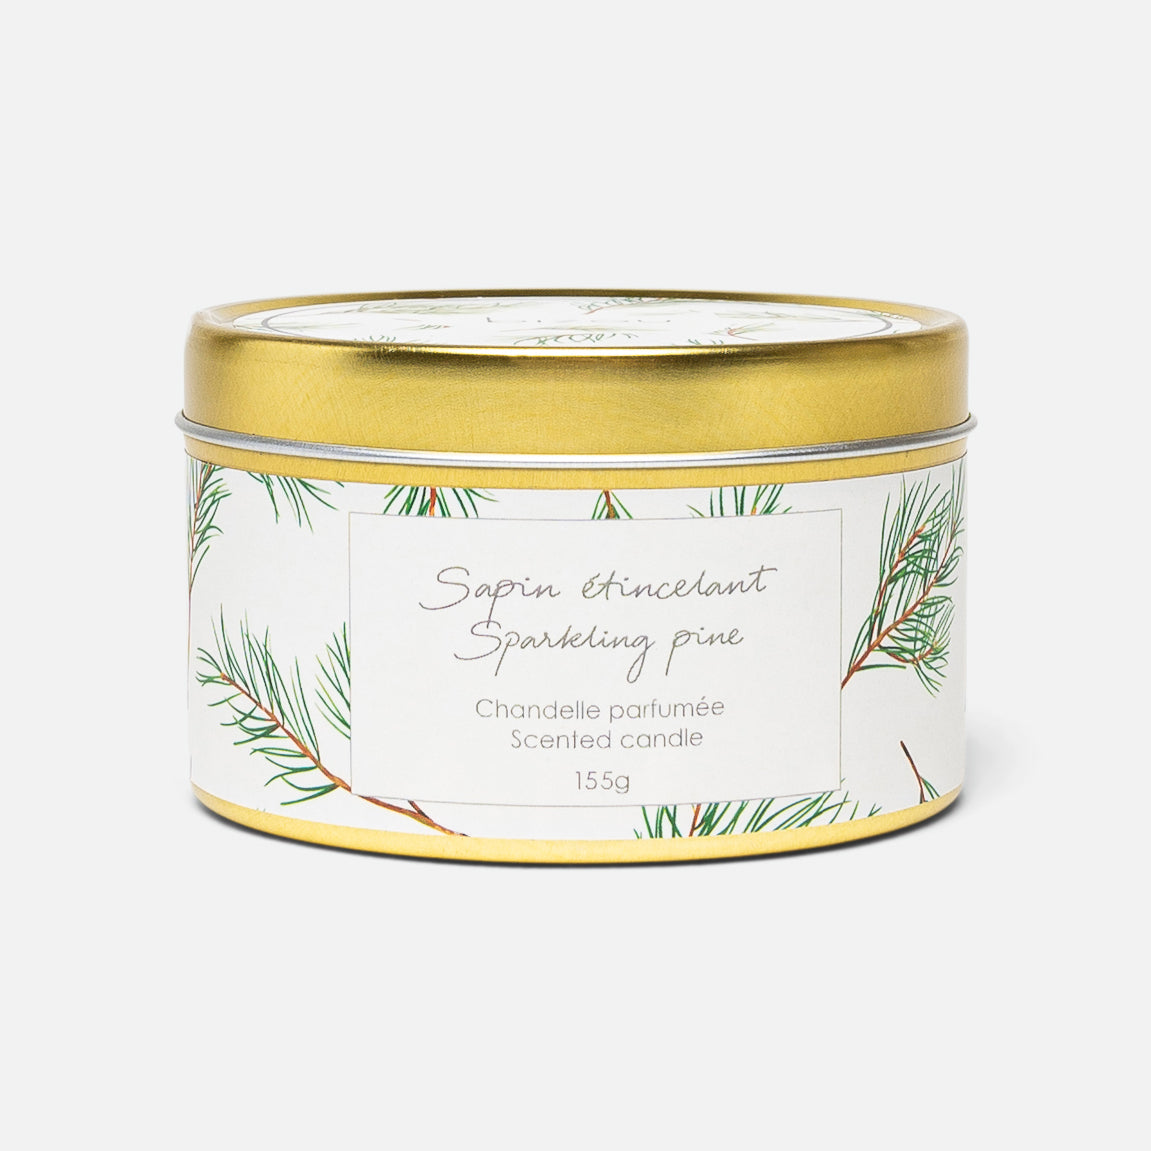 Sparkling pine scented candle